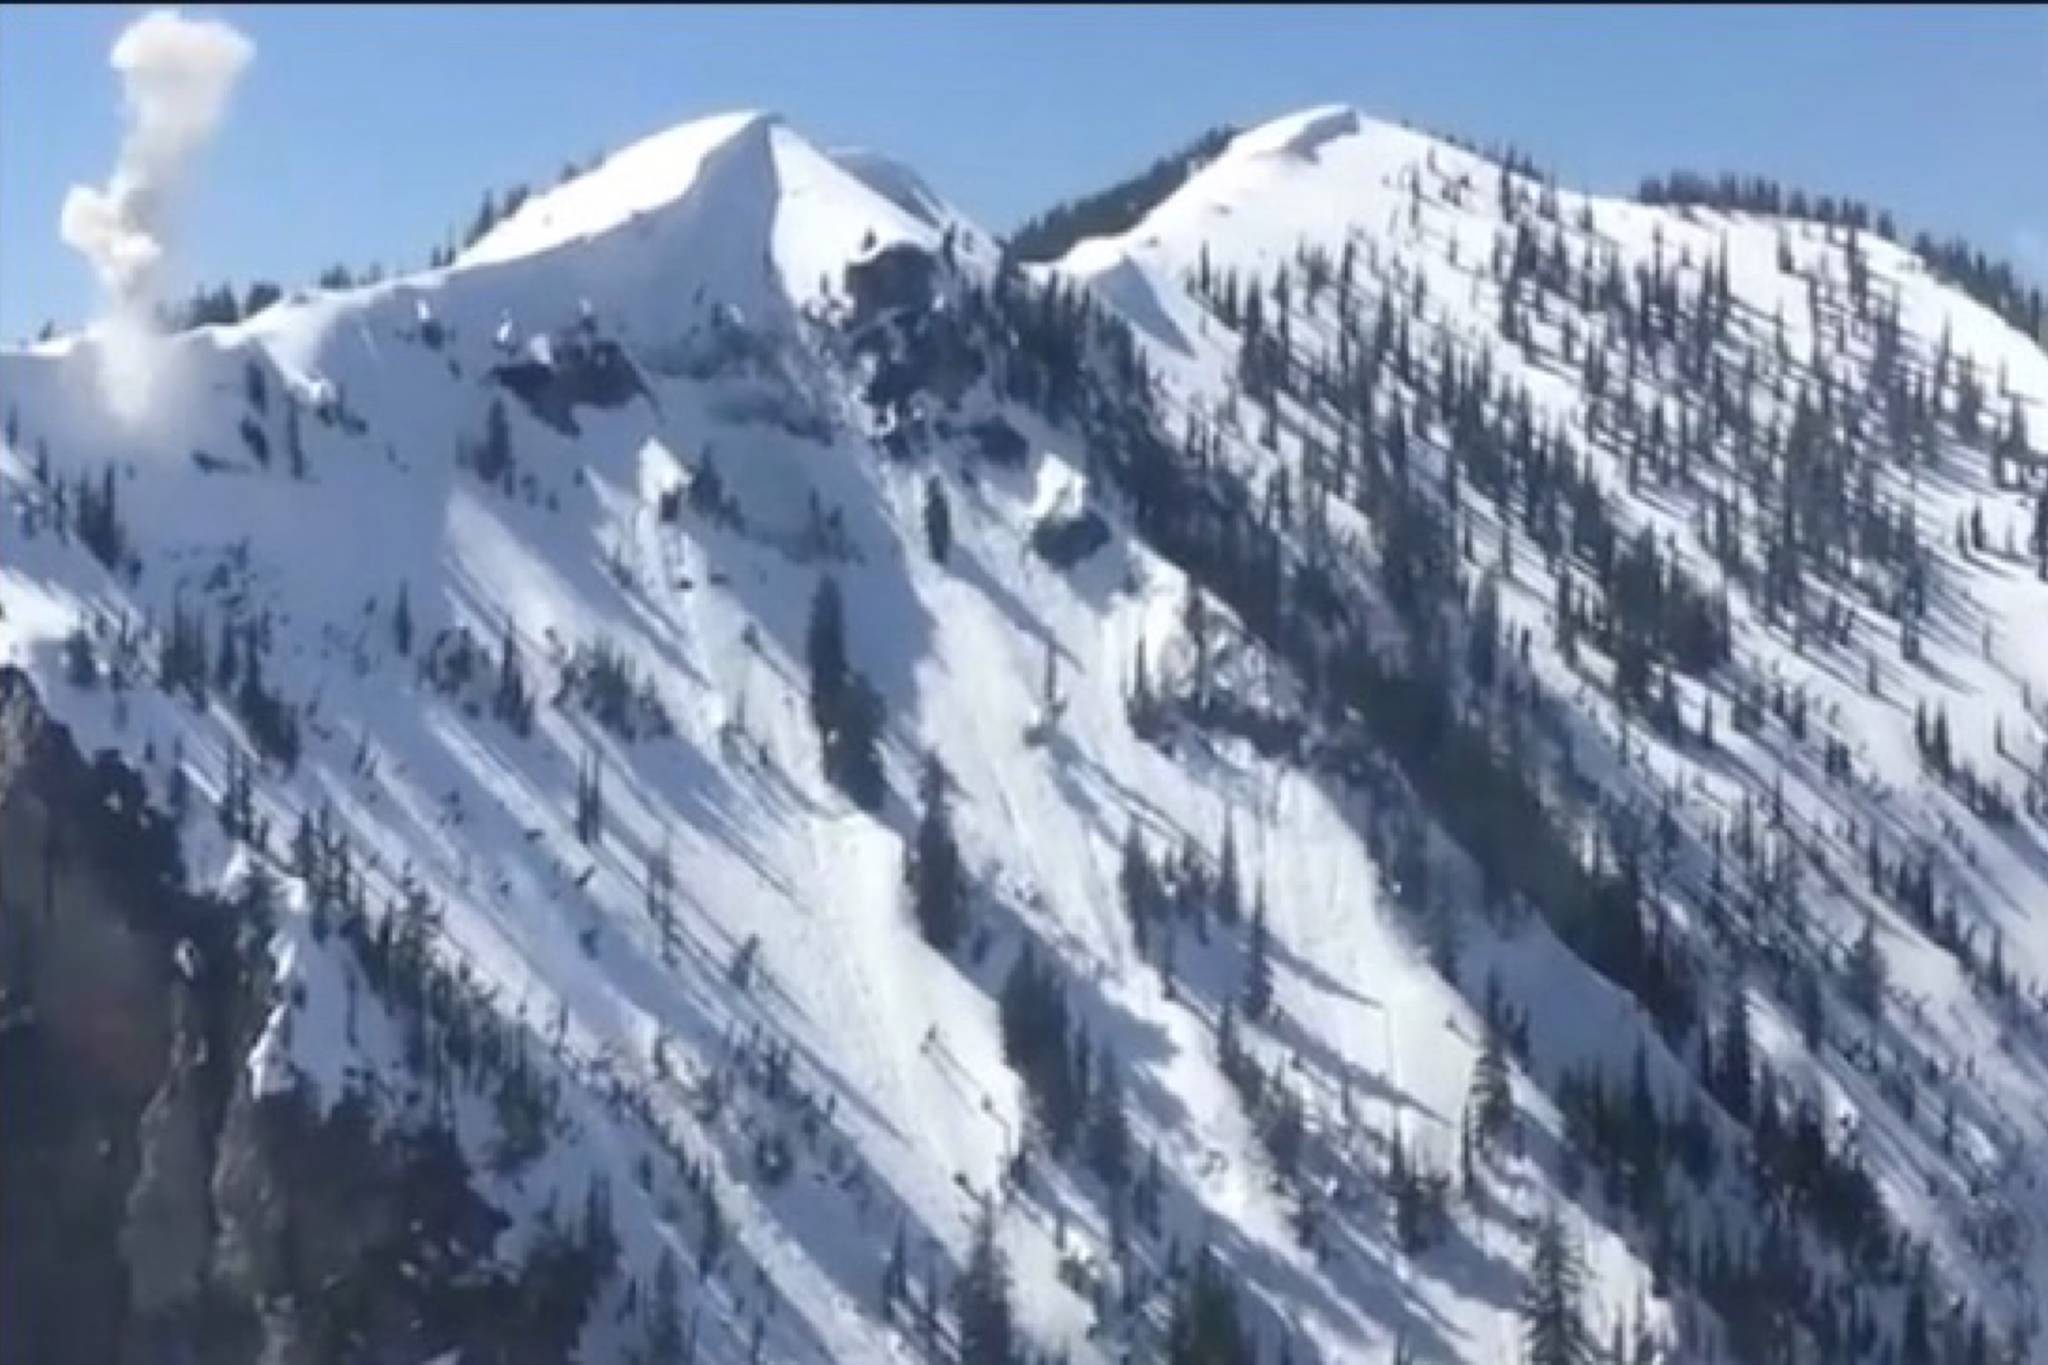 VIDEO: Avalanche prevention from a bird’s-eye view